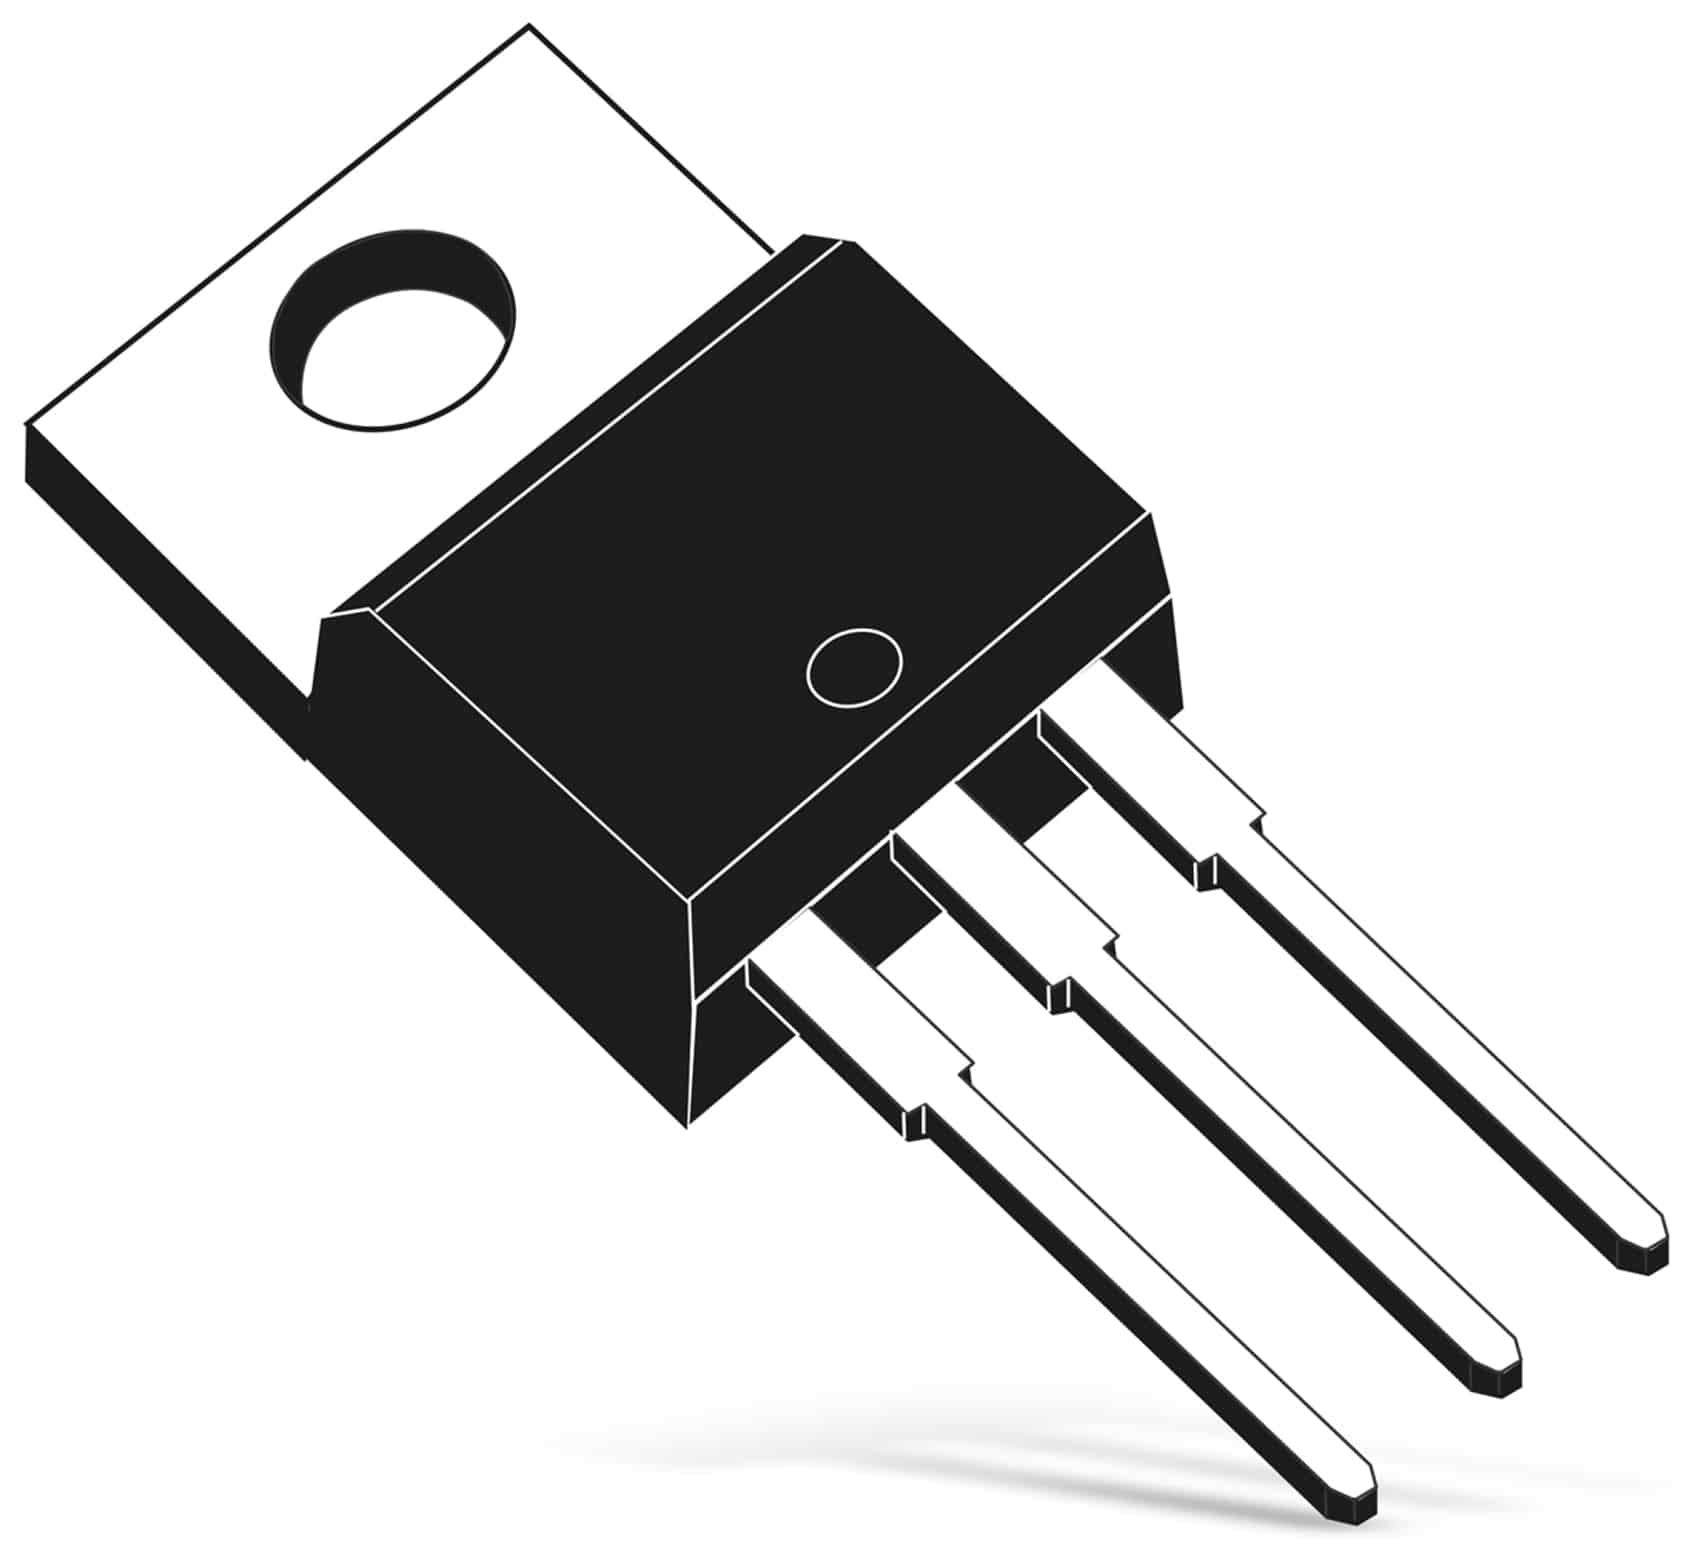 MBR 20100CT, Schottkydiode, 100 V, 20 A (2x10A),  TO220